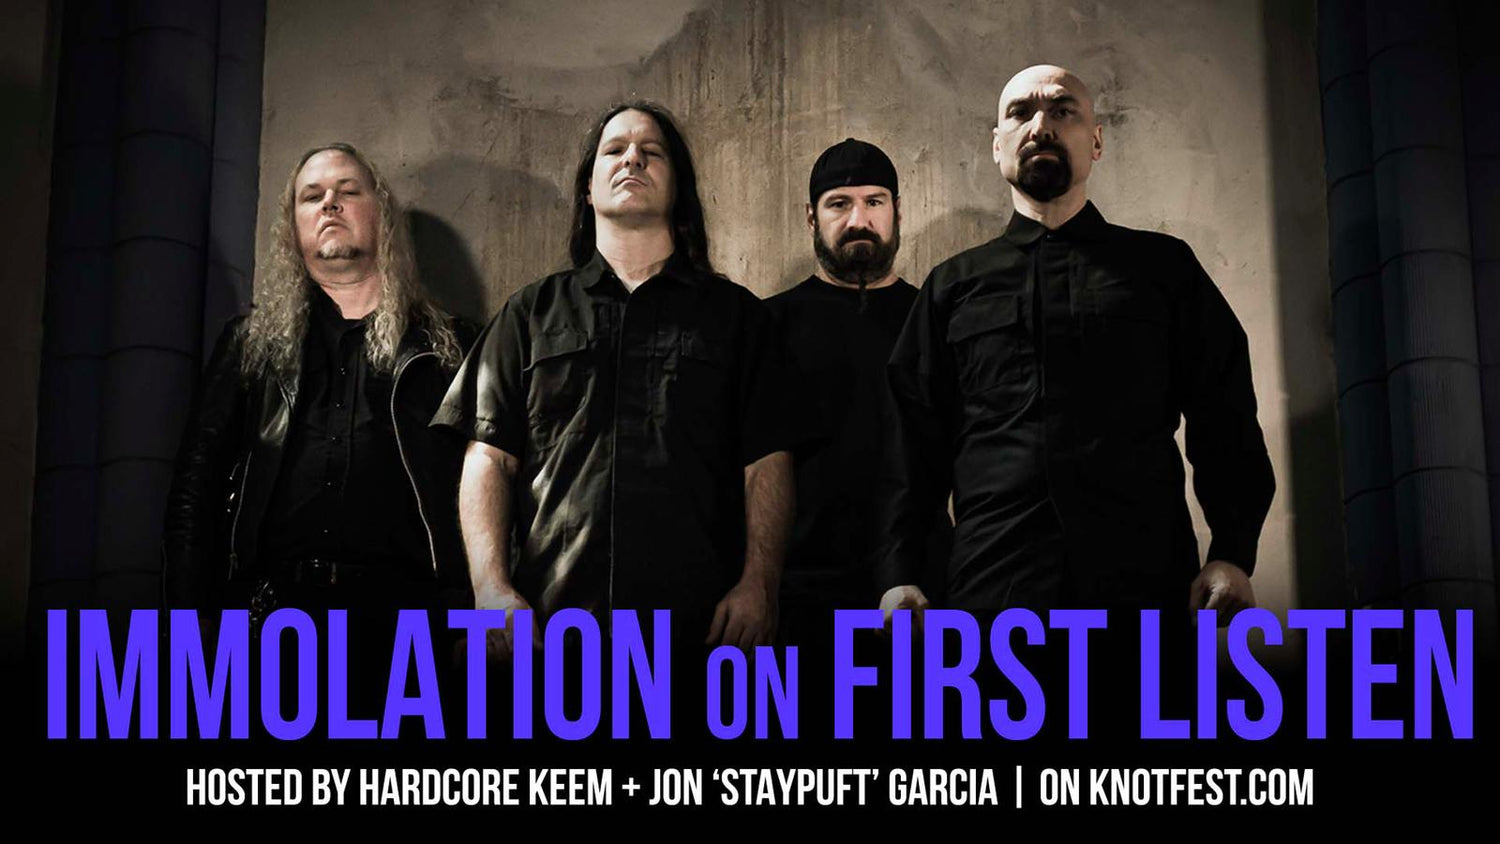 FIRST LISTEN - Immolation discuss new album Acts of God